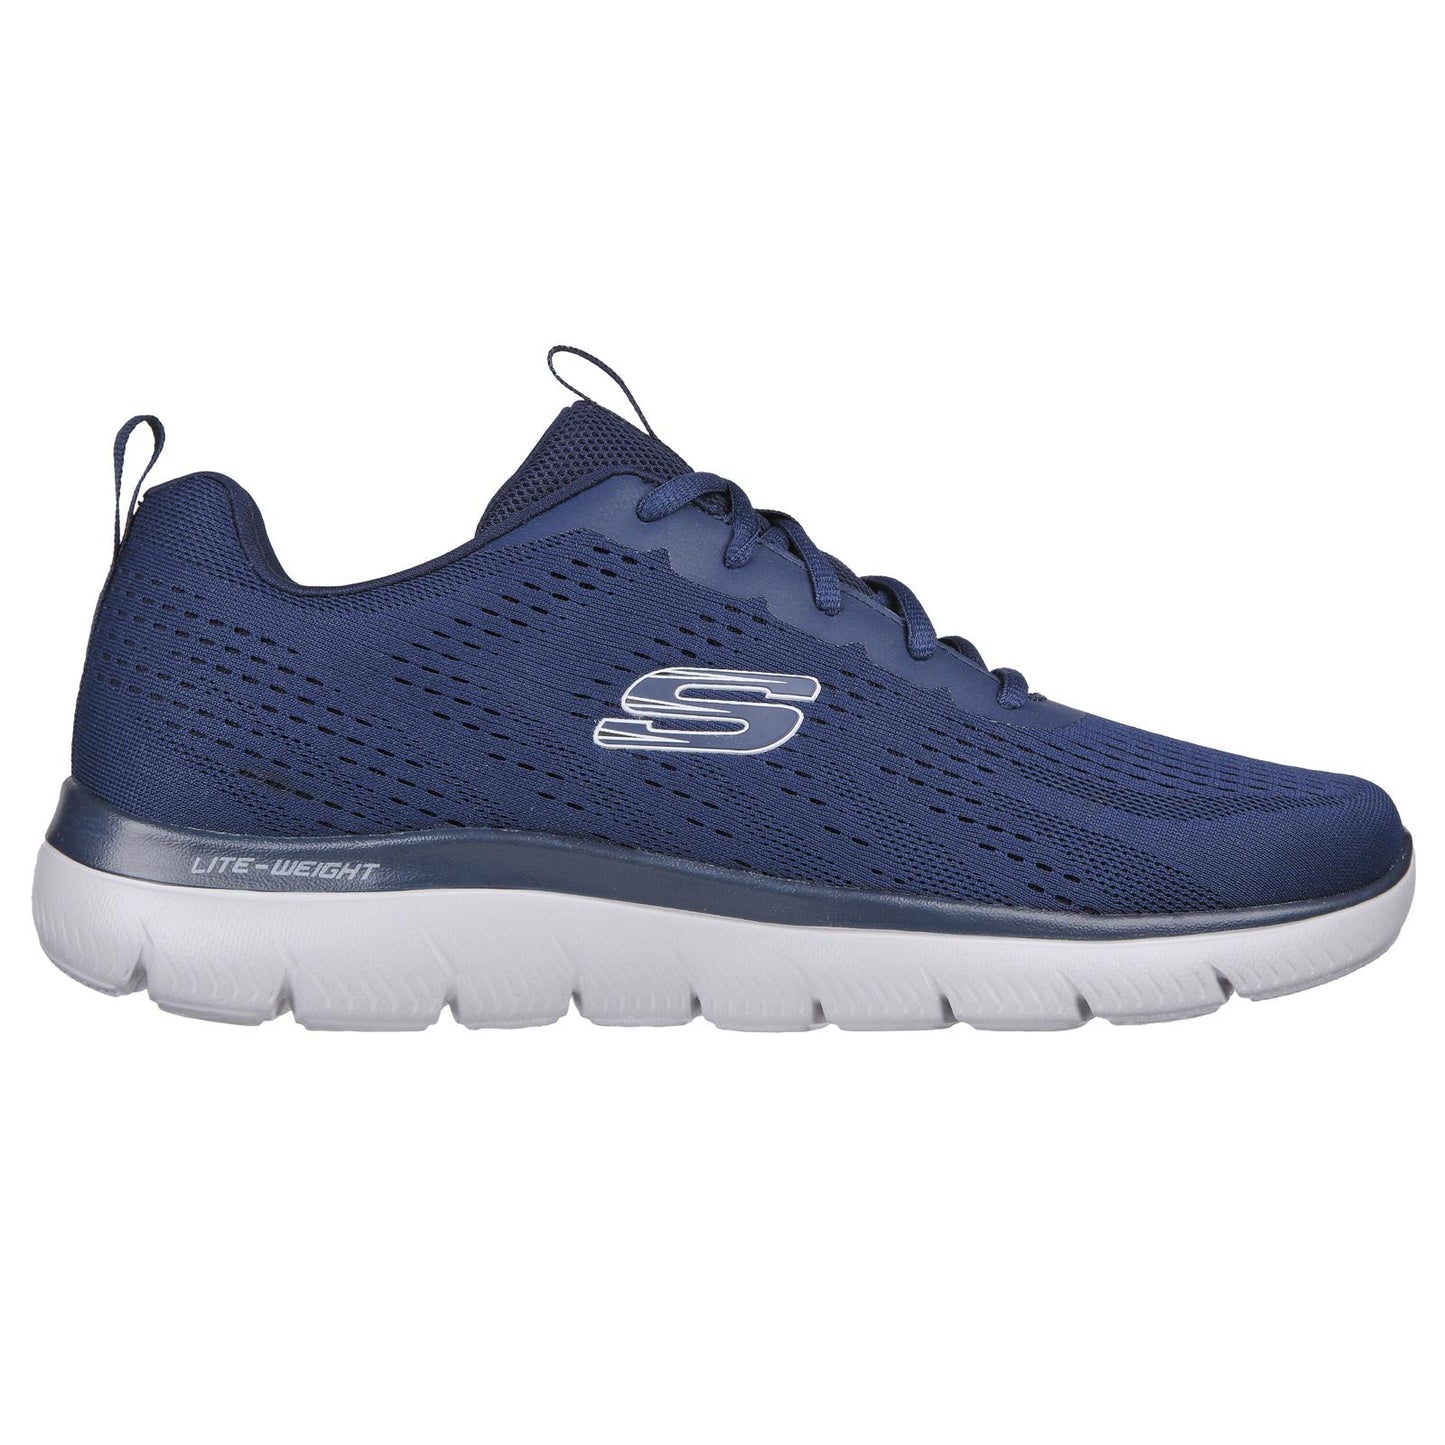 Skechers Summits Torre Mens Navy Blue Trainers 232395/NVGY